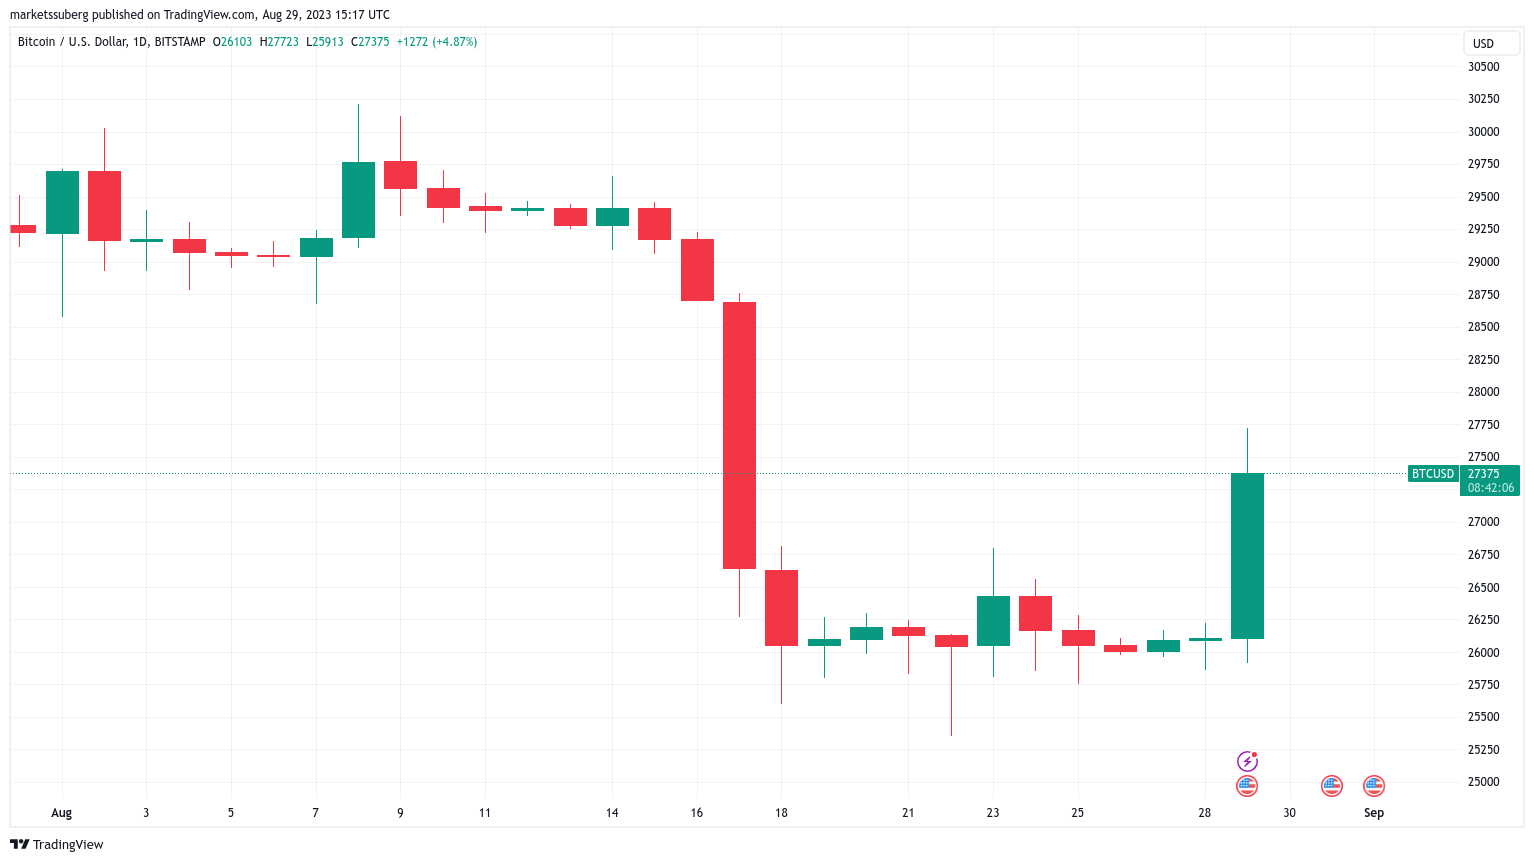 Bitcoin to US Dollar (BTC/USD) 24-hour chart data sourced from TradingView.